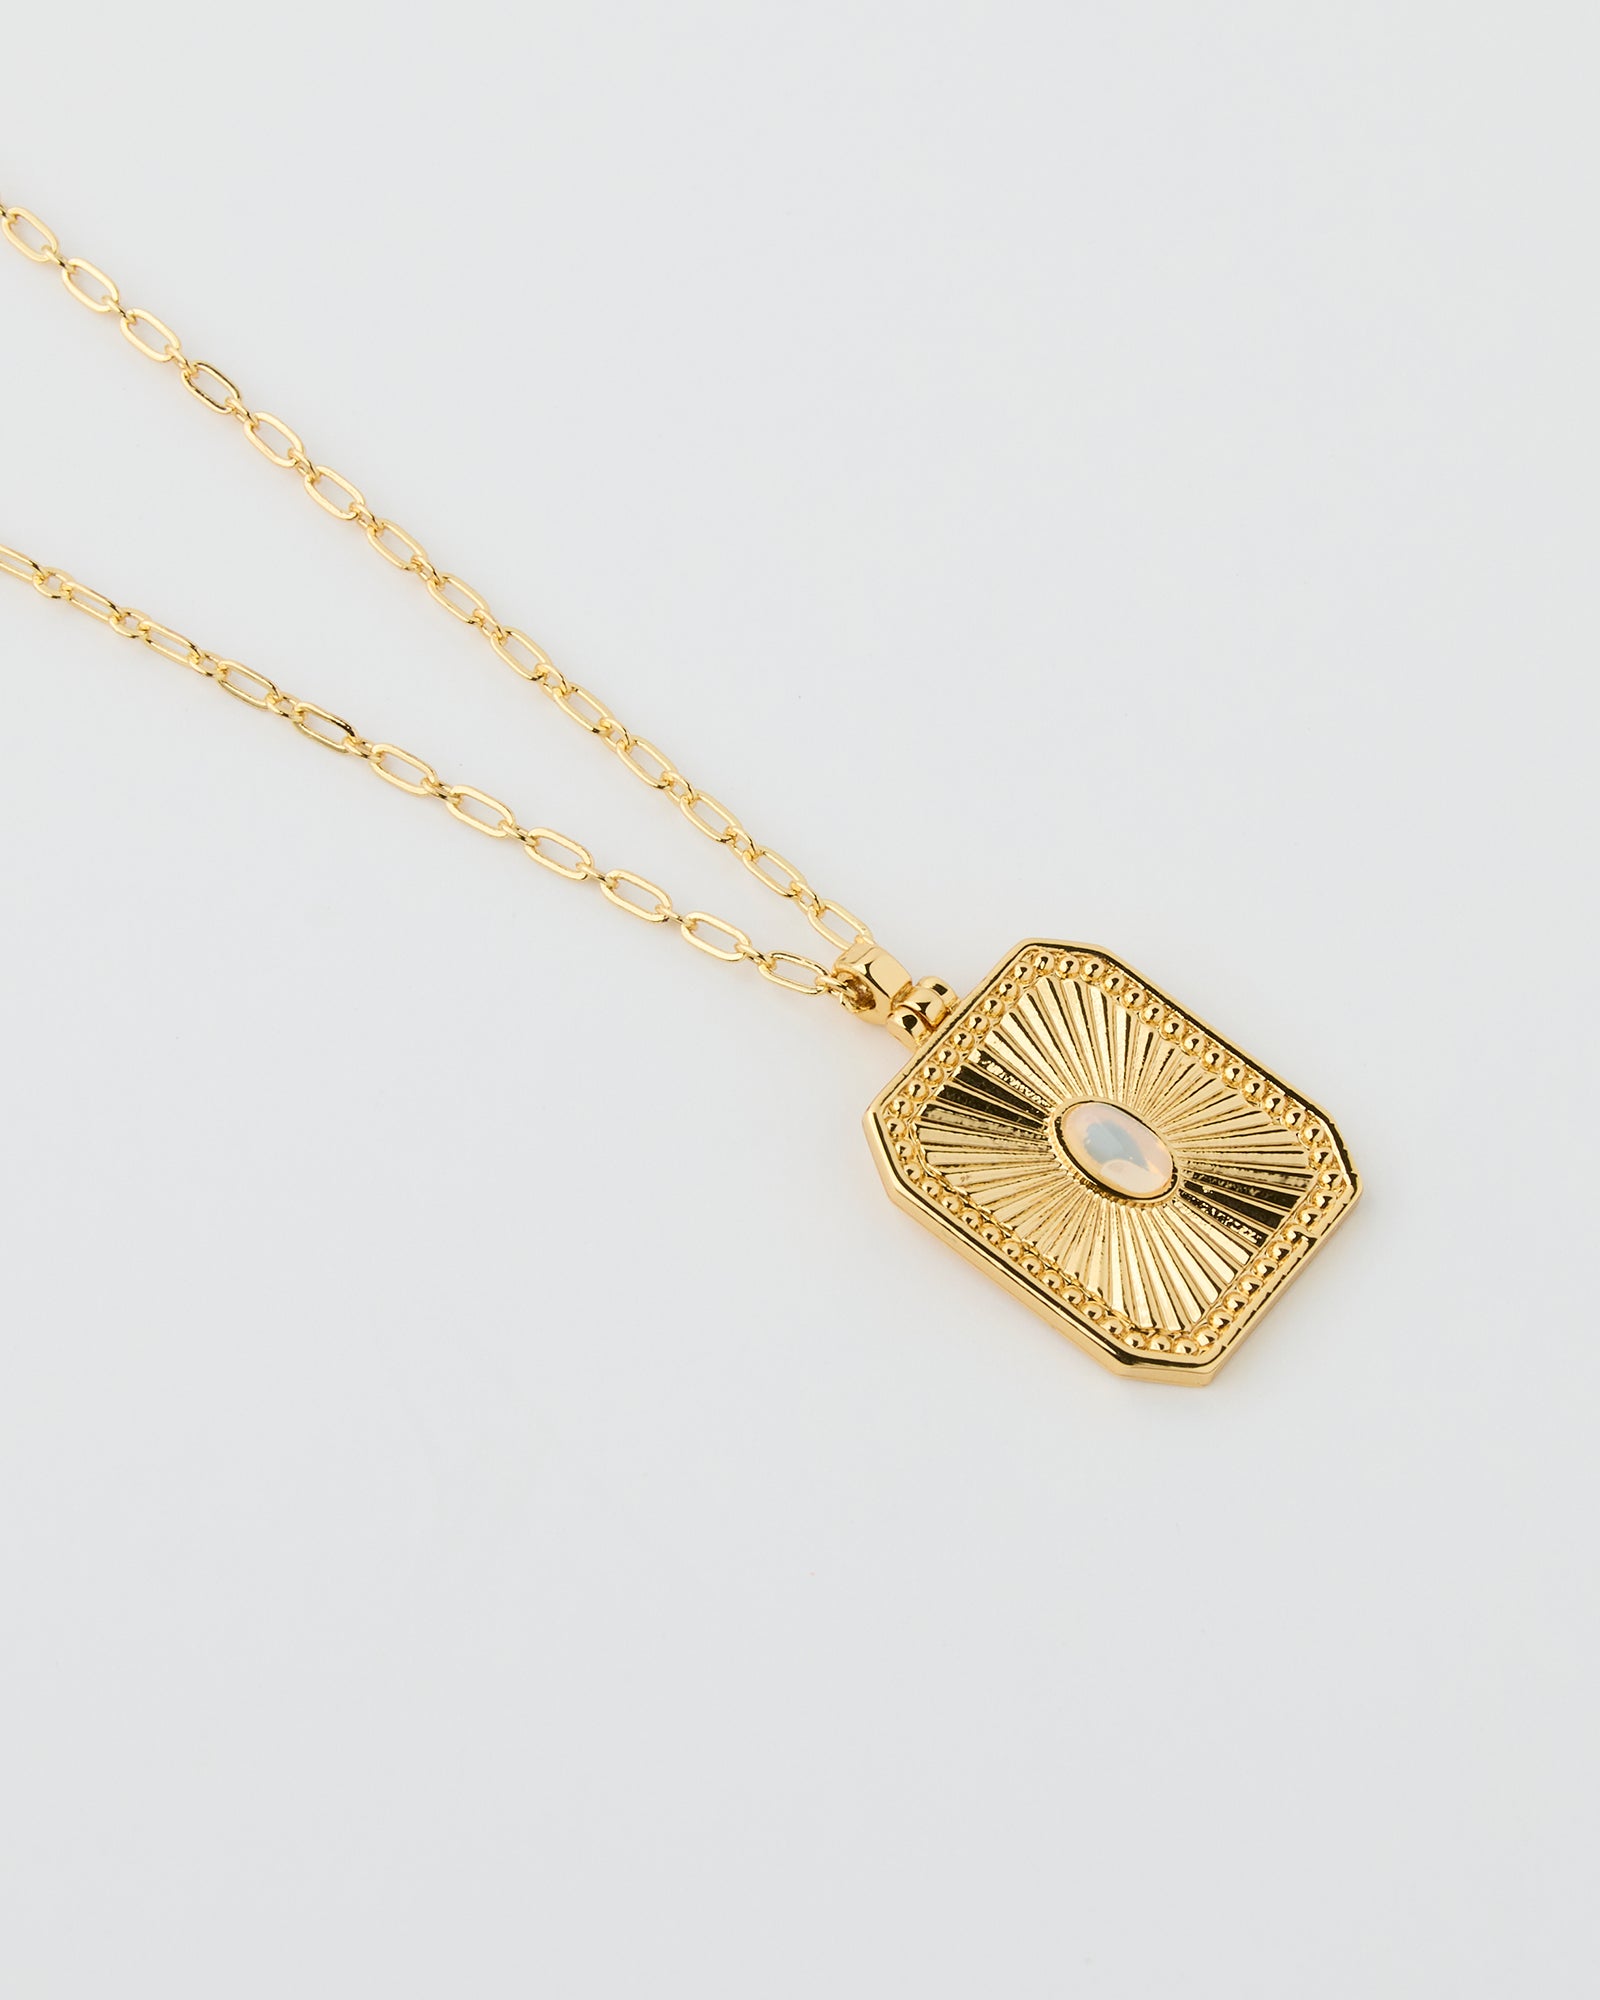 Gold chain necklace with rectangular pendant